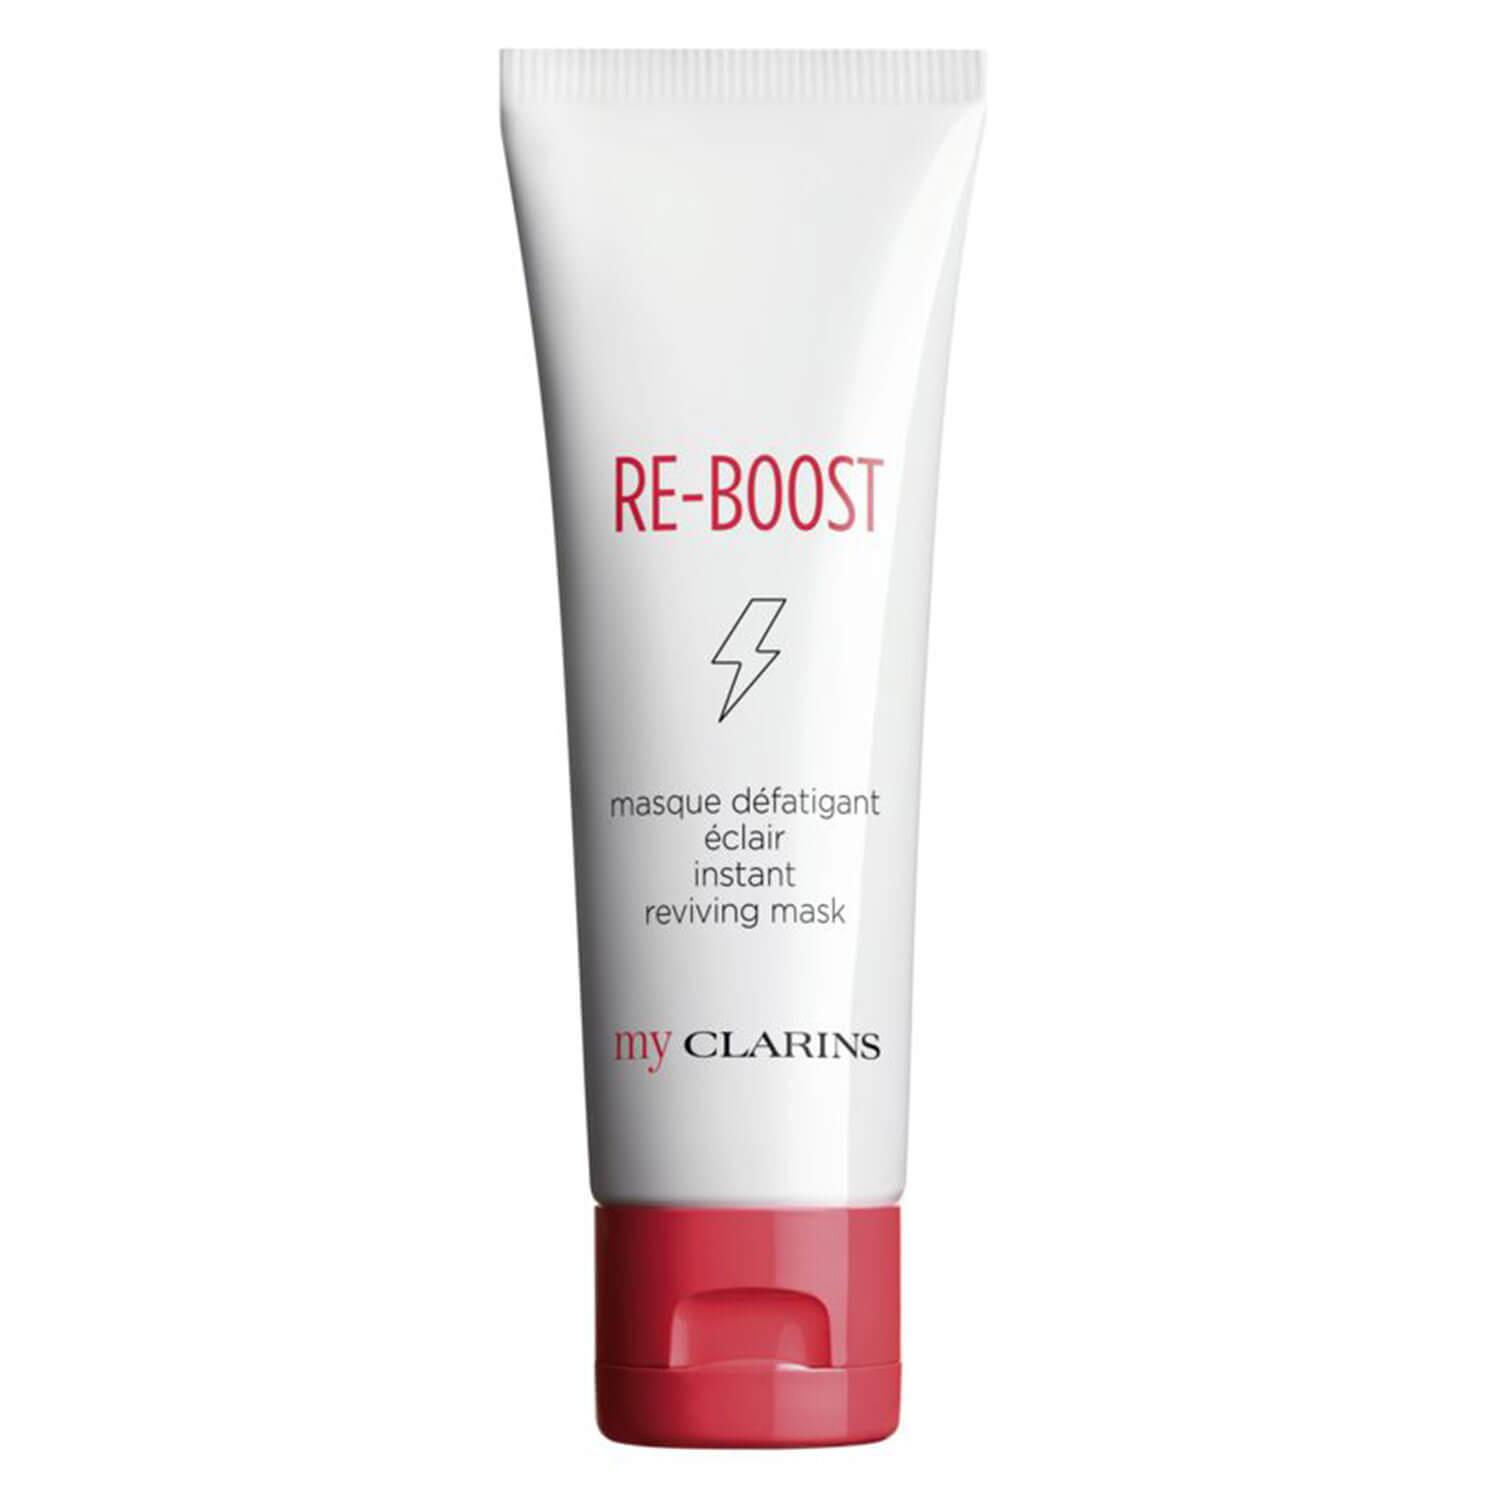 myCLARINS - RE-BOOST Reviving Mask